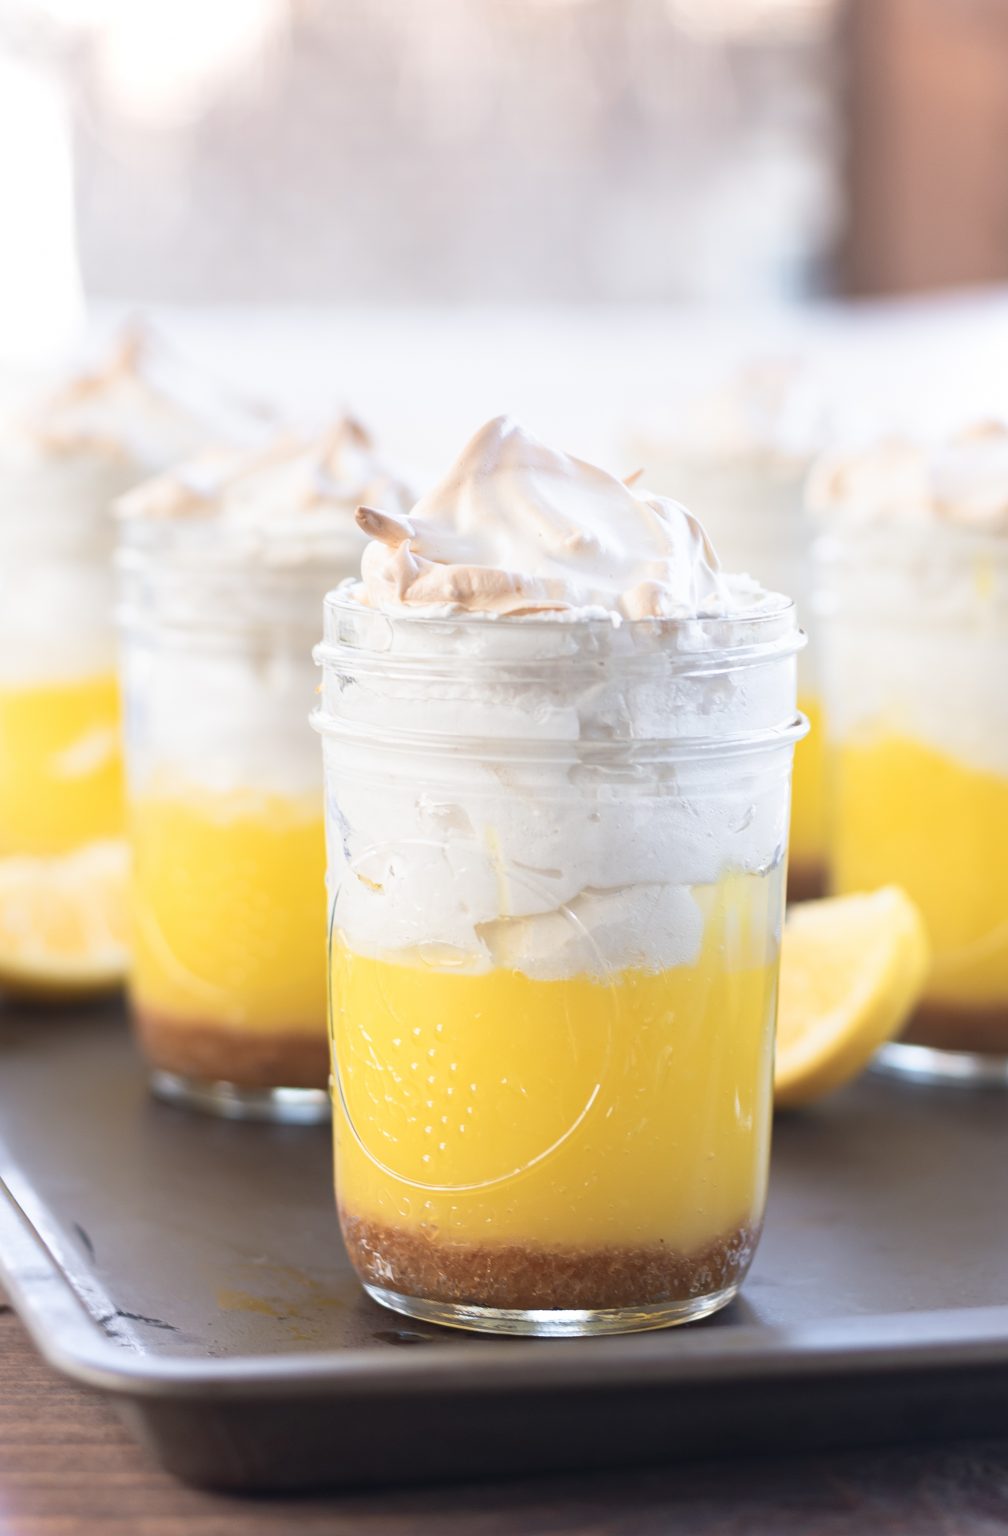 Jell-O Lemon Meringue Pie Recipe in Mason Jars - It All Started With Paint